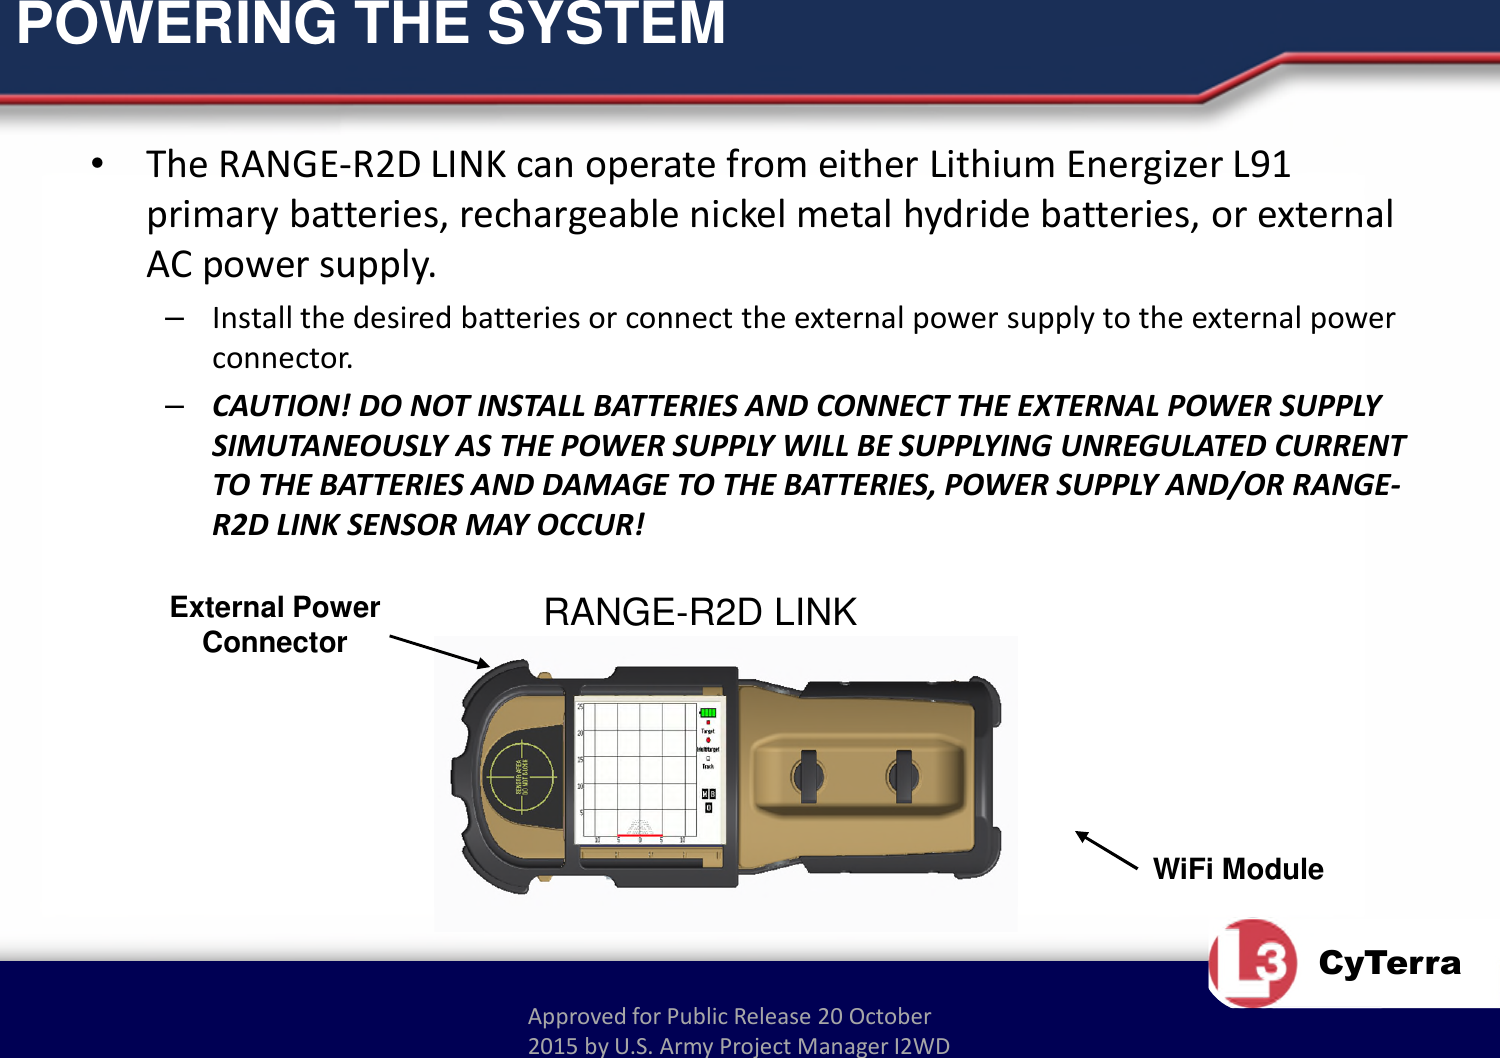 Approved for Public Release 20 October 2015 by U.S. Army Project Manager I2WDCyTerraPOWERING THE SYSTEM•The RANGE-R2D LINK can operate from either Lithium Energizer L91 primary batteries, rechargeable nickel metal hydride batteries, or external AC power supply.–Install the desired batteries or connect the external power supply to the external power connector.–CAUTION! DO NOT INSTALL BATTERIES AND CONNECT THE EXTERNAL POWER SUPPLY SIMUTANEOUSLY AS THE POWER SUPPLY WILL BE SUPPLYING UNREGULATED CURRENT TO THE BATTERIES AND DAMAGE TO THE BATTERIES, POWER SUPPLY AND/OR RANGE-R2D LINK SENSOR MAY OCCUR!WiFi ModuleRANGE-R2D LINKExternal Power Connector